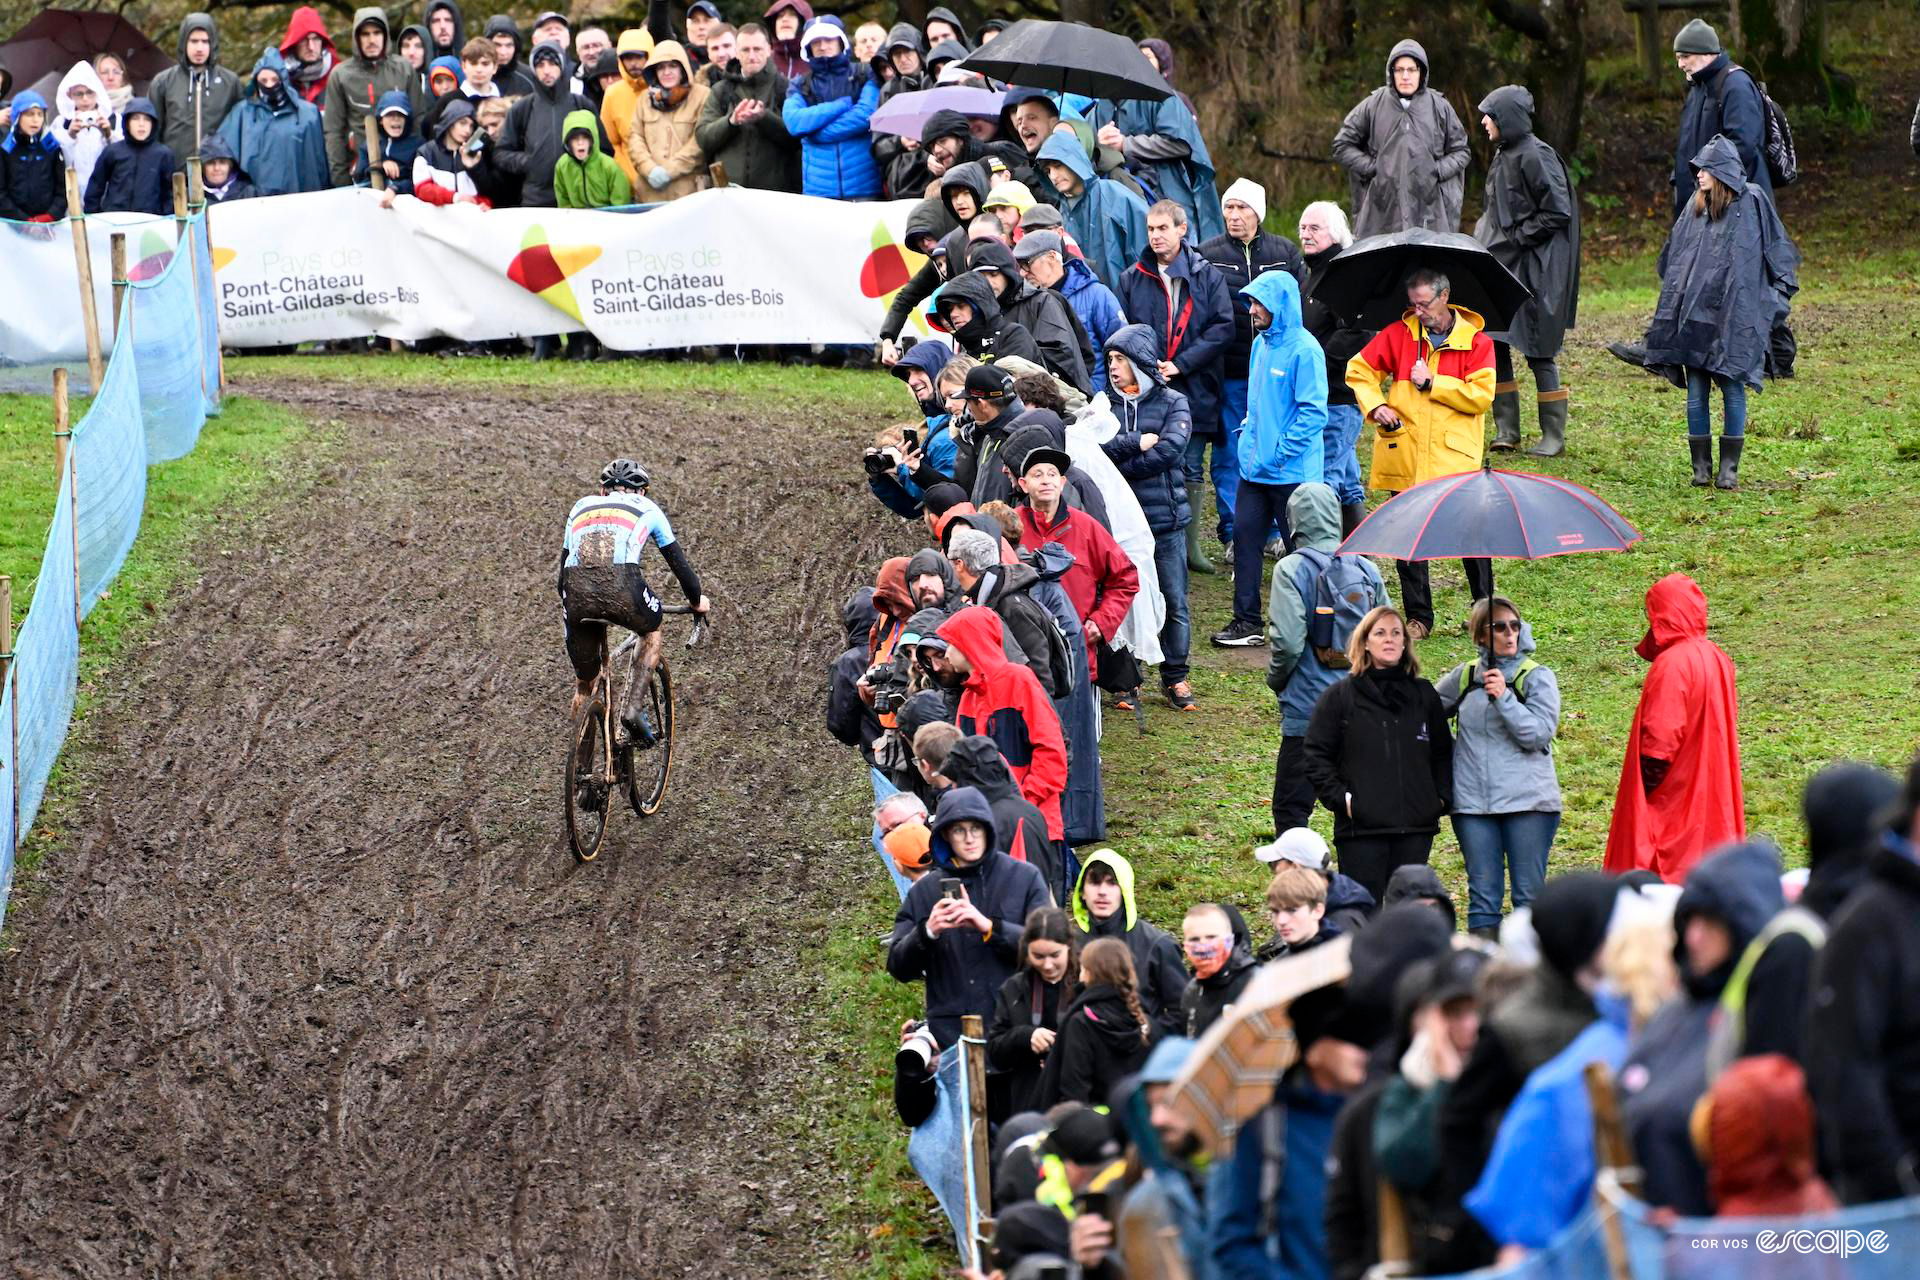 Michael Vanthourenhout of Belgium rides away through thick mud, crowds lining the fence, umbrellas raised, during the european cyclocross champs.